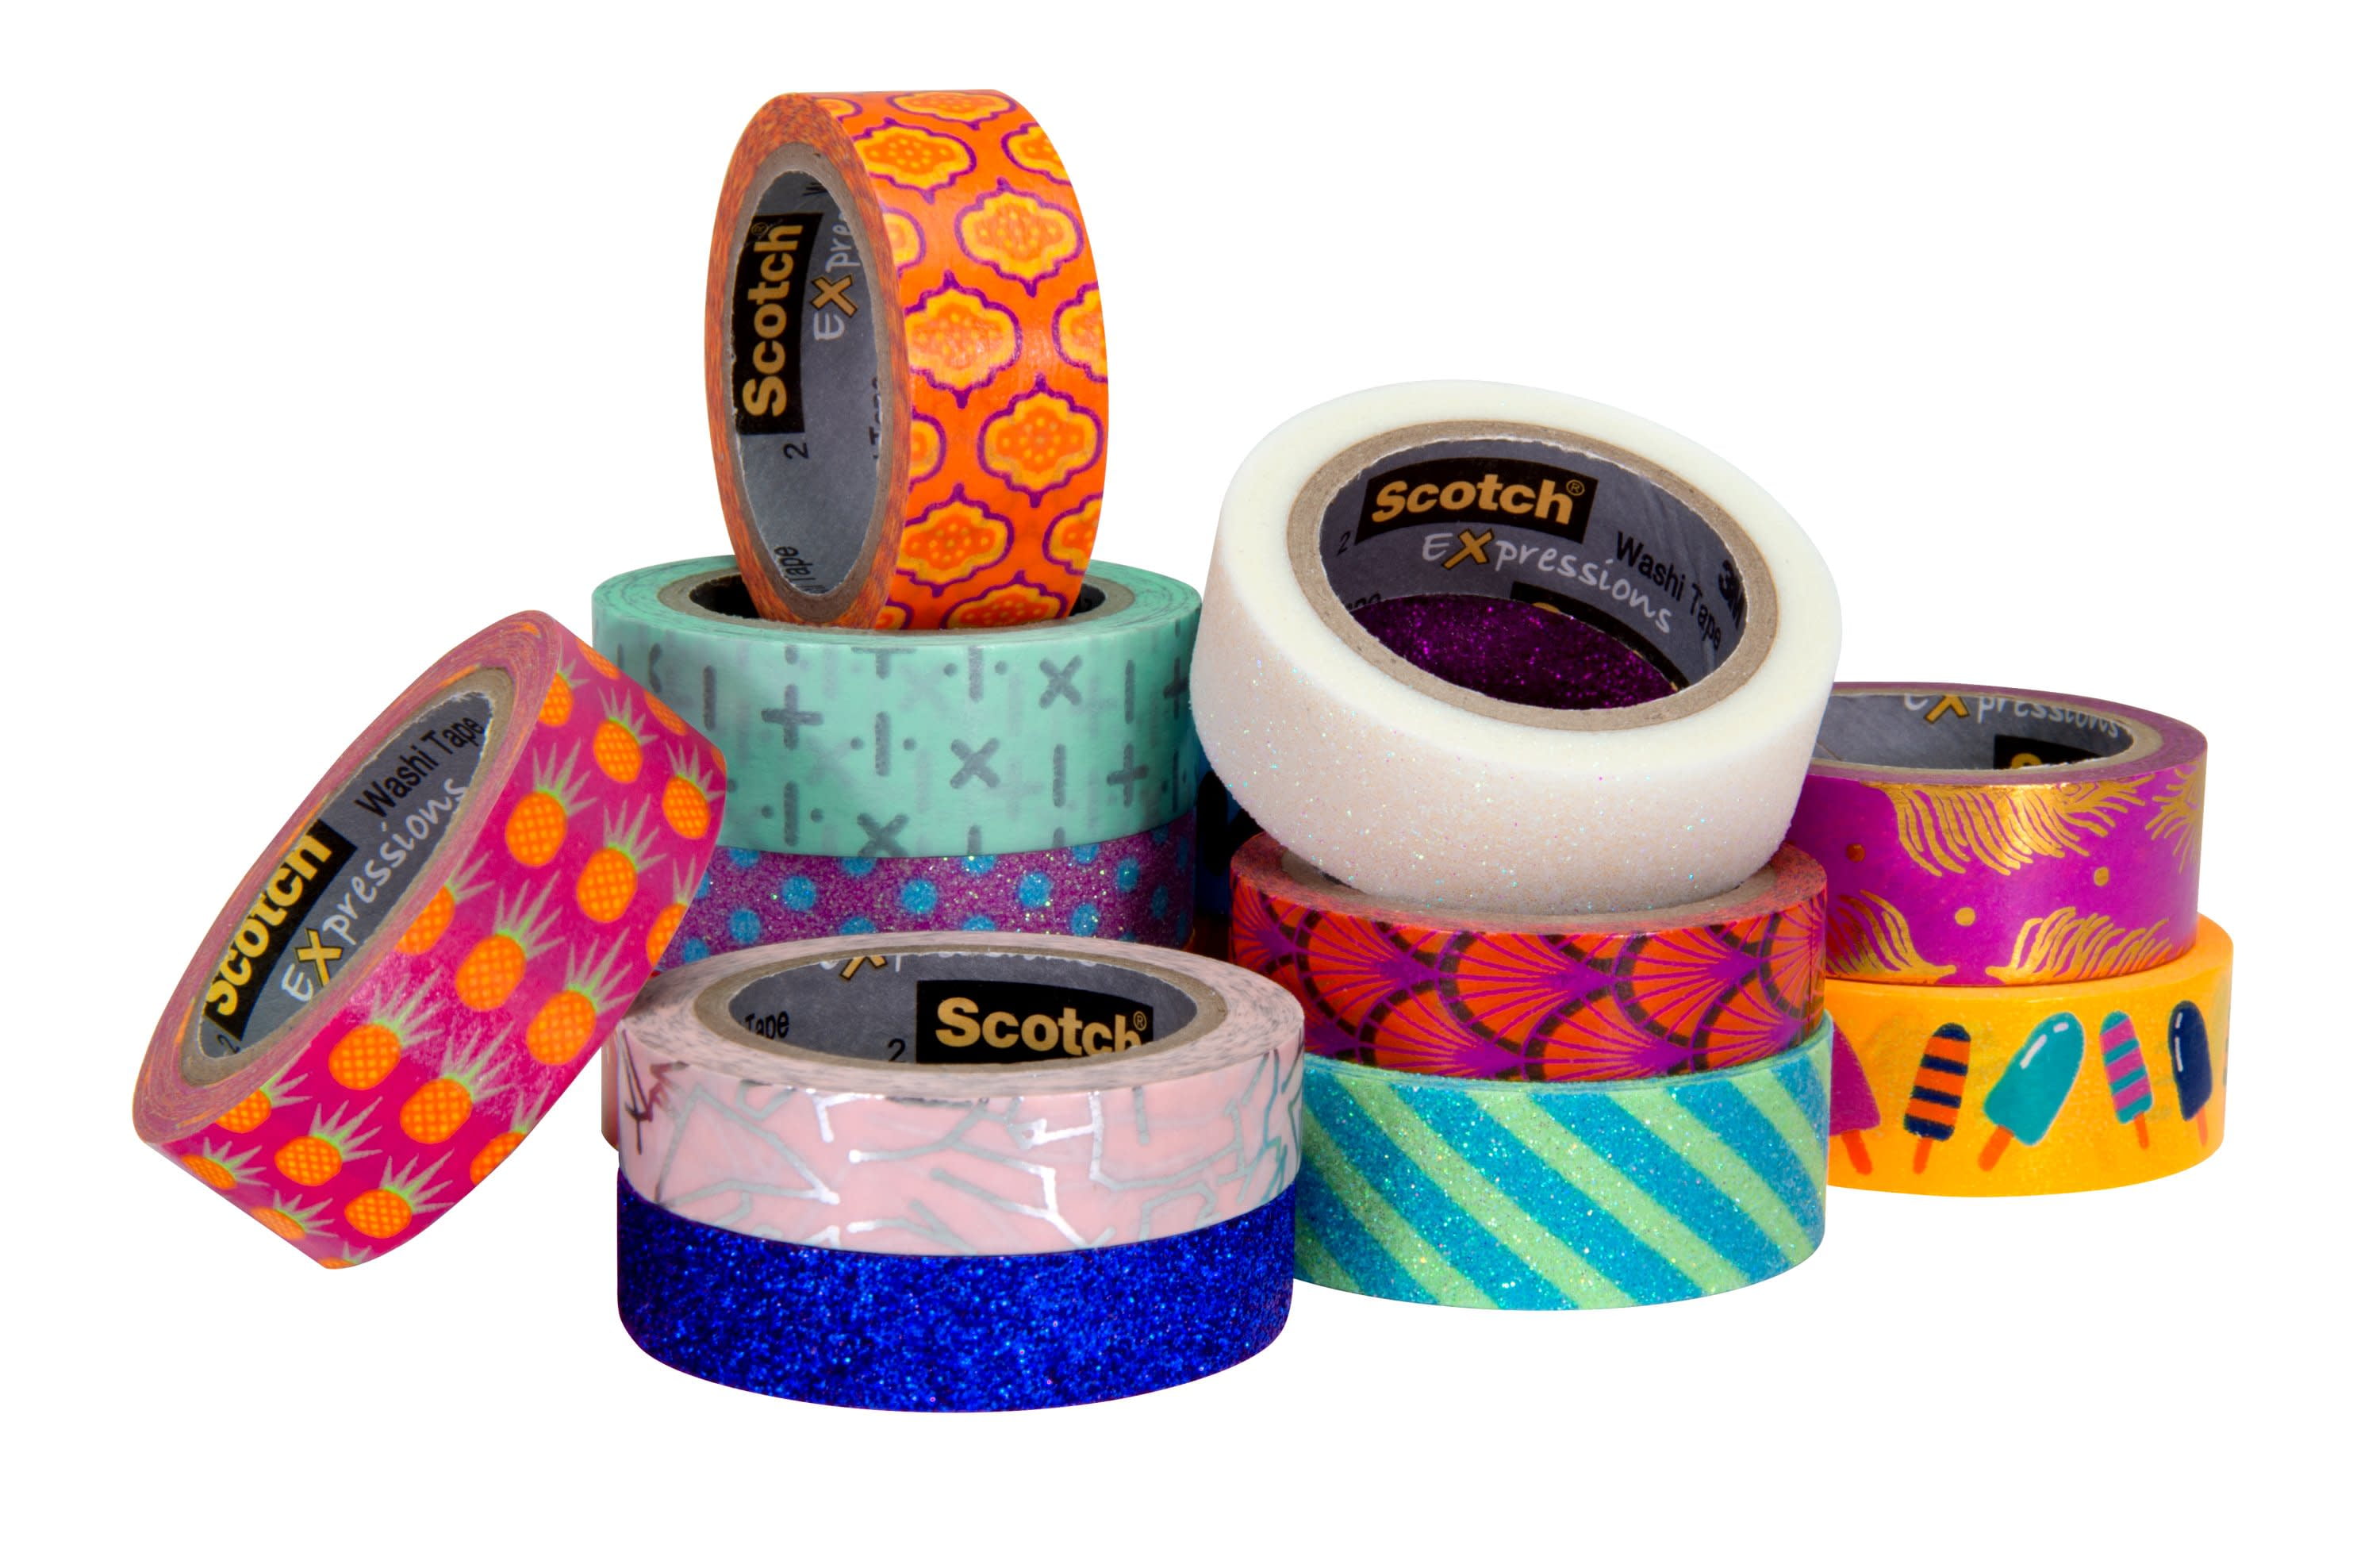 Scotch Expressions Washi Tape, Navy Blue & White, 59 x 393, 1 Roll